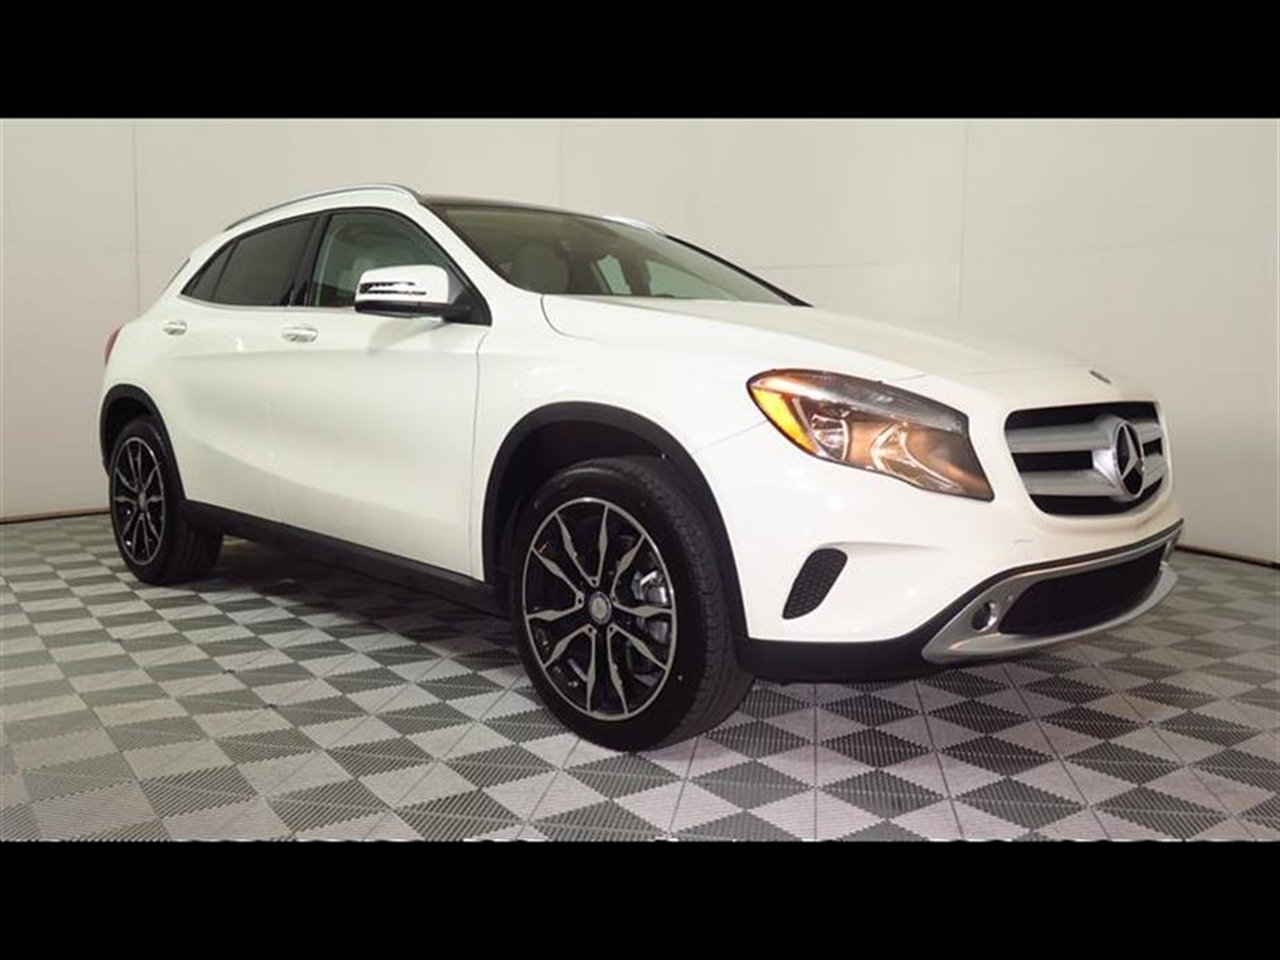 Is there a Mercedes-Benz dealer located near Plano, Texas?